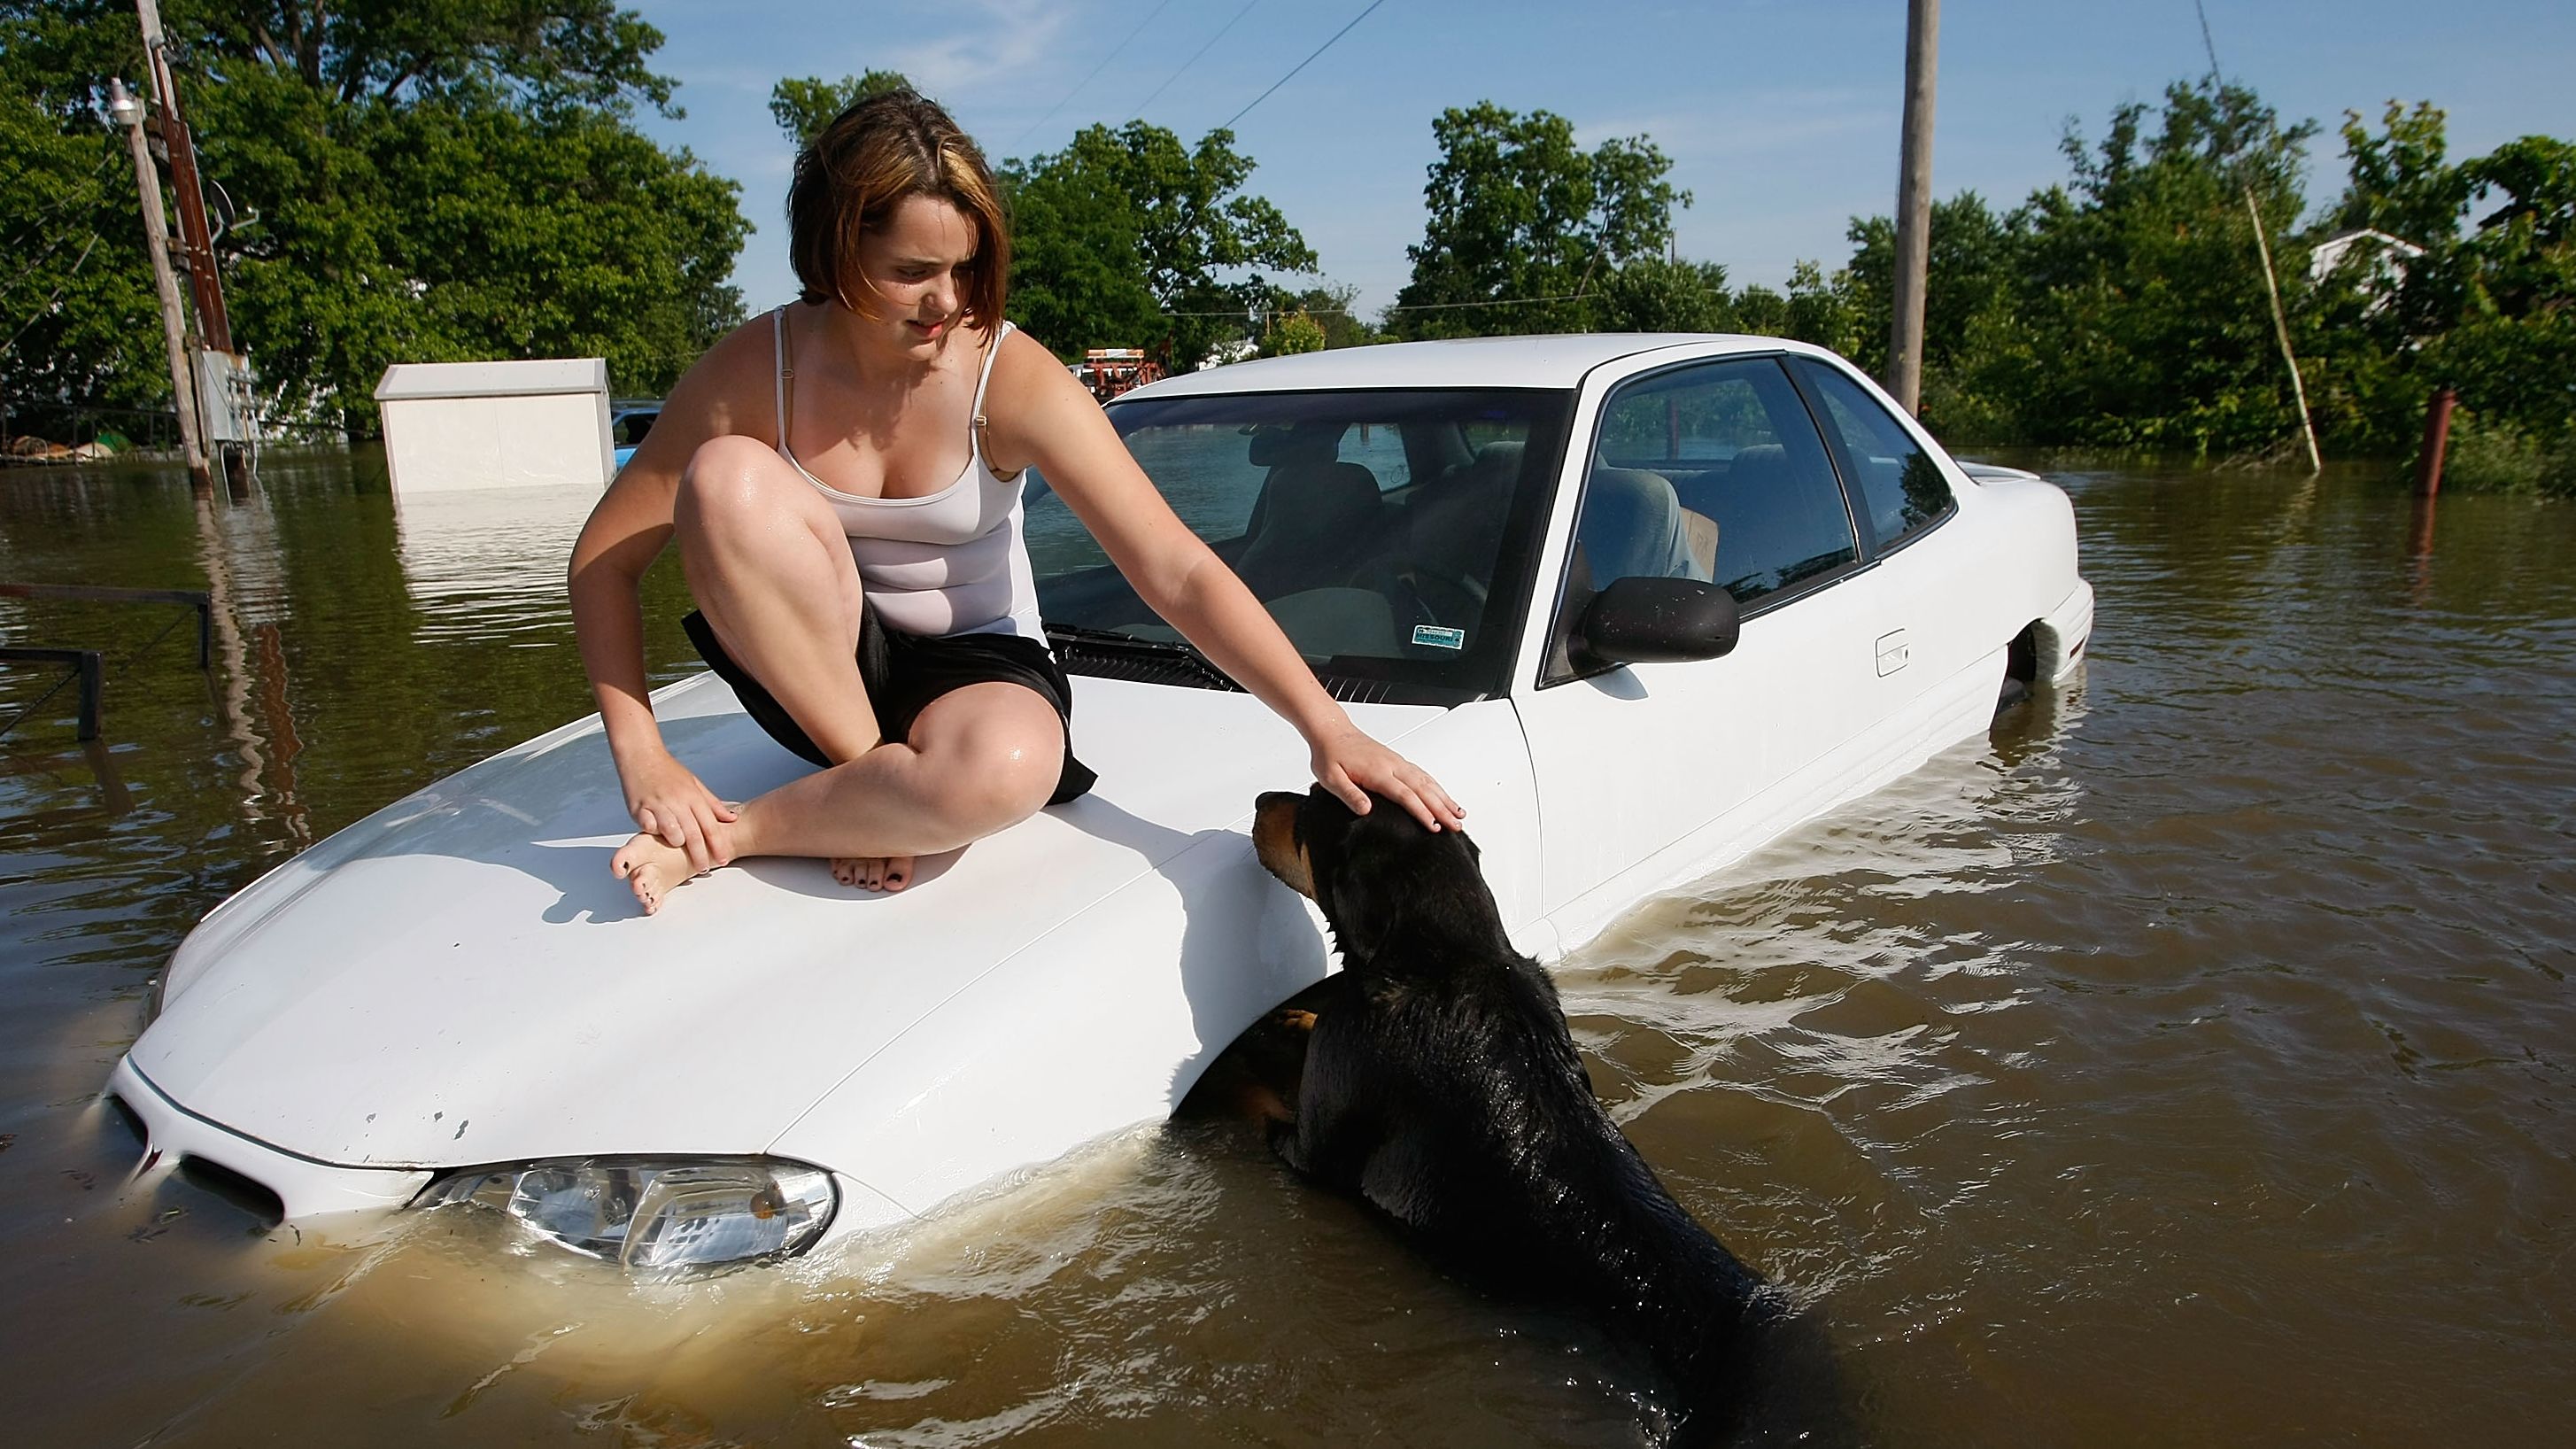 When the Mississippi River flooded parts of Missouri, Alexae Dunn and her dog Lady were surrounded by waist-high water.